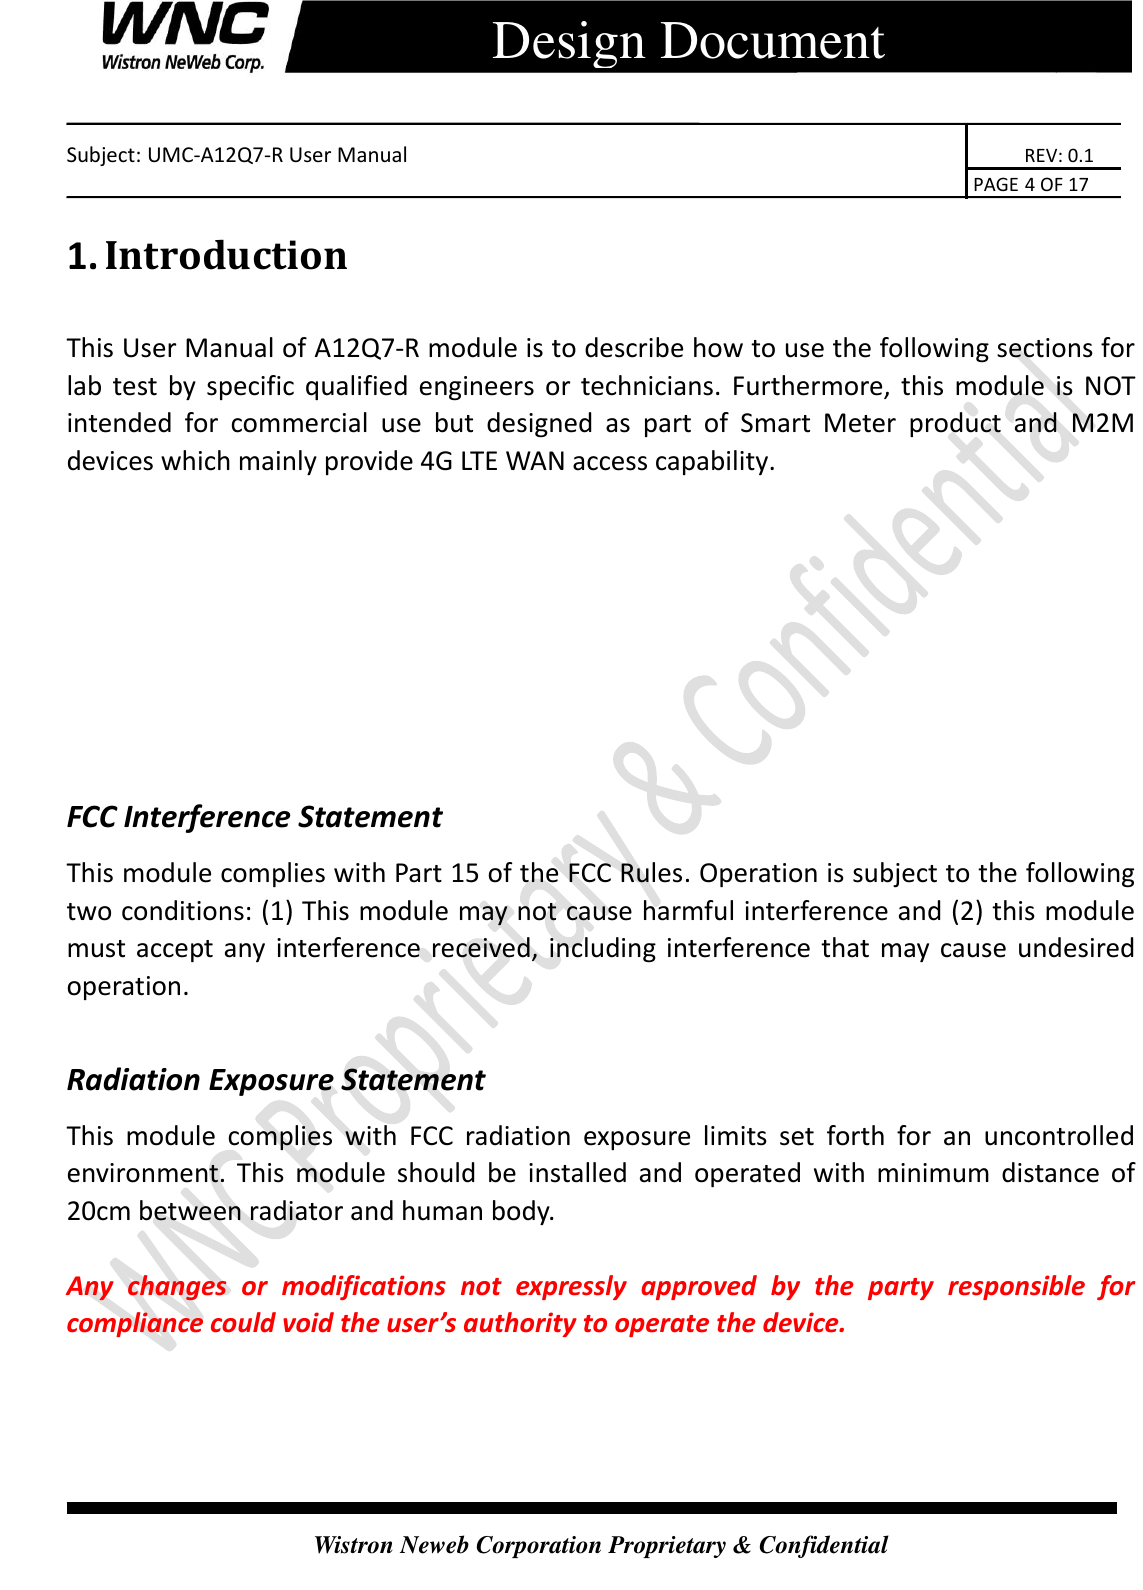    Subject: UMC-A12Q7-R User Manual                                                                      REV: 0.1                                                                                        PAGE 4 OF 17  Wistron Neweb Corporation Proprietary &amp; Confidential      Design Document 1. Introduction This User Manual of A12Q7-R module is to describe how to use the following sections for lab test  by specific qualified engineers  or  technicians.  Furthermore, this module is NOT intended  for  commercial  use  but  designed  as  part  of  Smart  Meter  product  and  M2M devices which mainly provide 4G LTE WAN access capability.     FCC Interference Statement This module complies with Part 15 of the FCC Rules. Operation is subject to the following two conditions: (1) This module may not cause harmful interference and (2) this module must accept any interference received, including interference that may cause undesired operation.  Radiation Exposure Statement This  module  complies  with  FCC  radiation  exposure  limits  set  forth  for  an  uncontrolled environment.  This  module  should  be  installed  and  operated  with  minimum  distance  of 20cm between radiator and human body.  Any  changes  or  modifications  not  expressly  approved  by  the  party  responsible  for compliance could void the user’s authority to operate the device. 